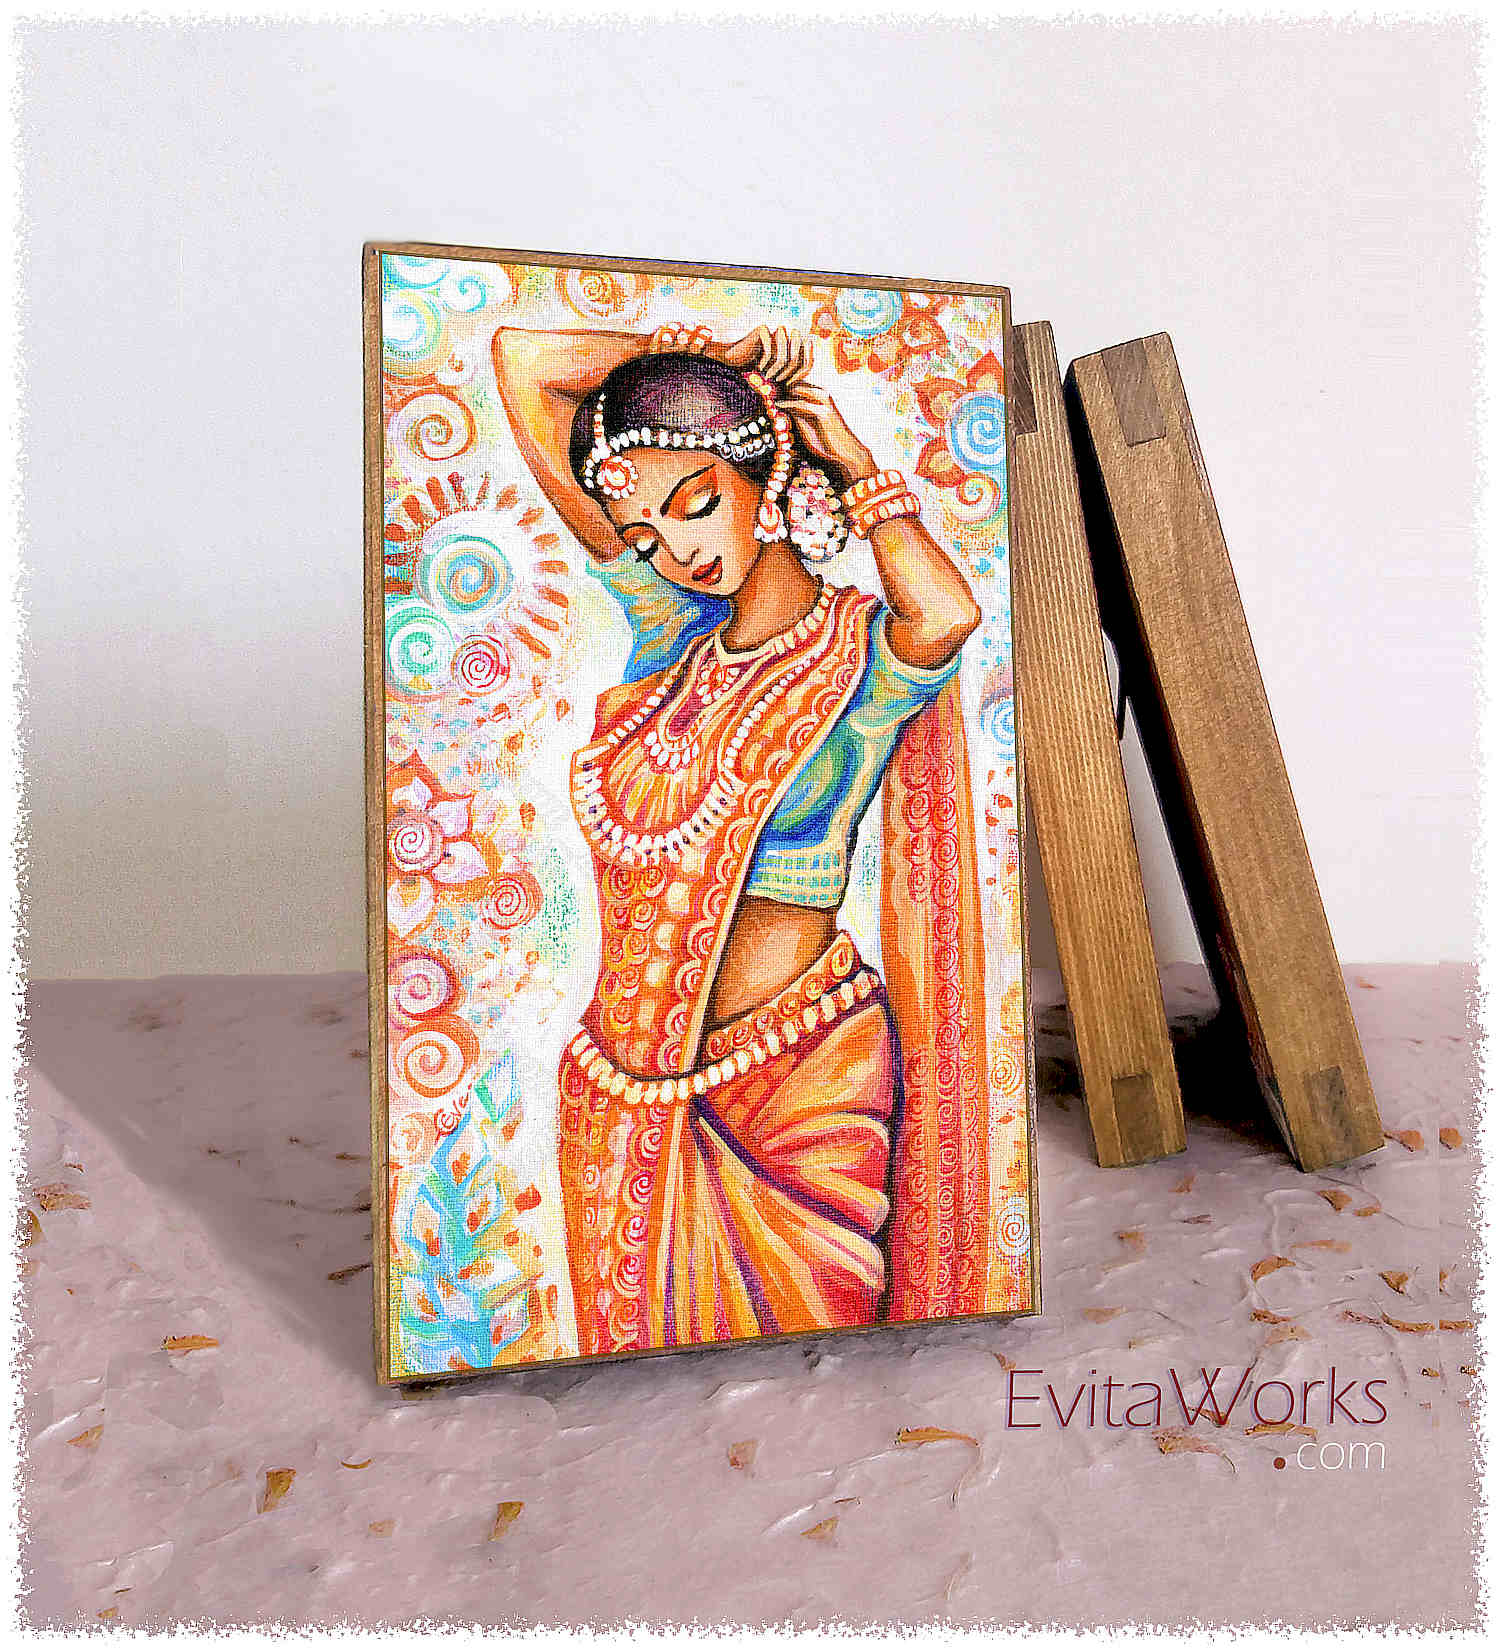 Hit to learn about "Aroma of Saffron, Indian girl" on woodblocks